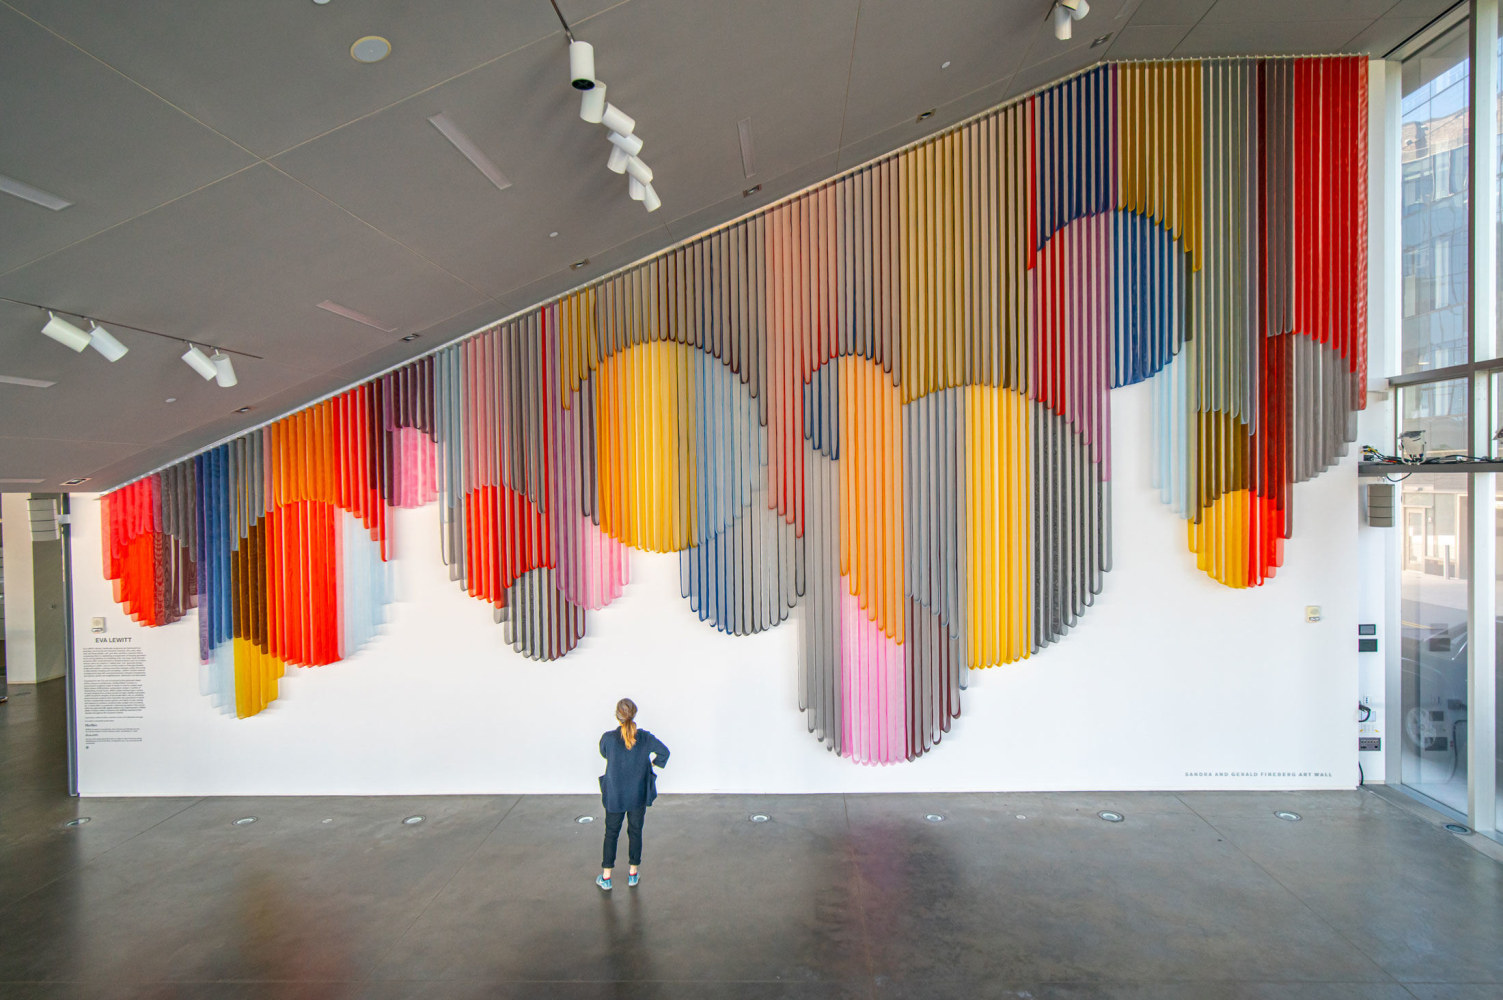 Eva LeWitt
Untitled (Mesh Circles), 2021
Installation view at&amp;nbsp;the Institute of Contemporary Art/Boston, 2021
Image courtesy of ICA/Boston
Photo by Ernesto Galan